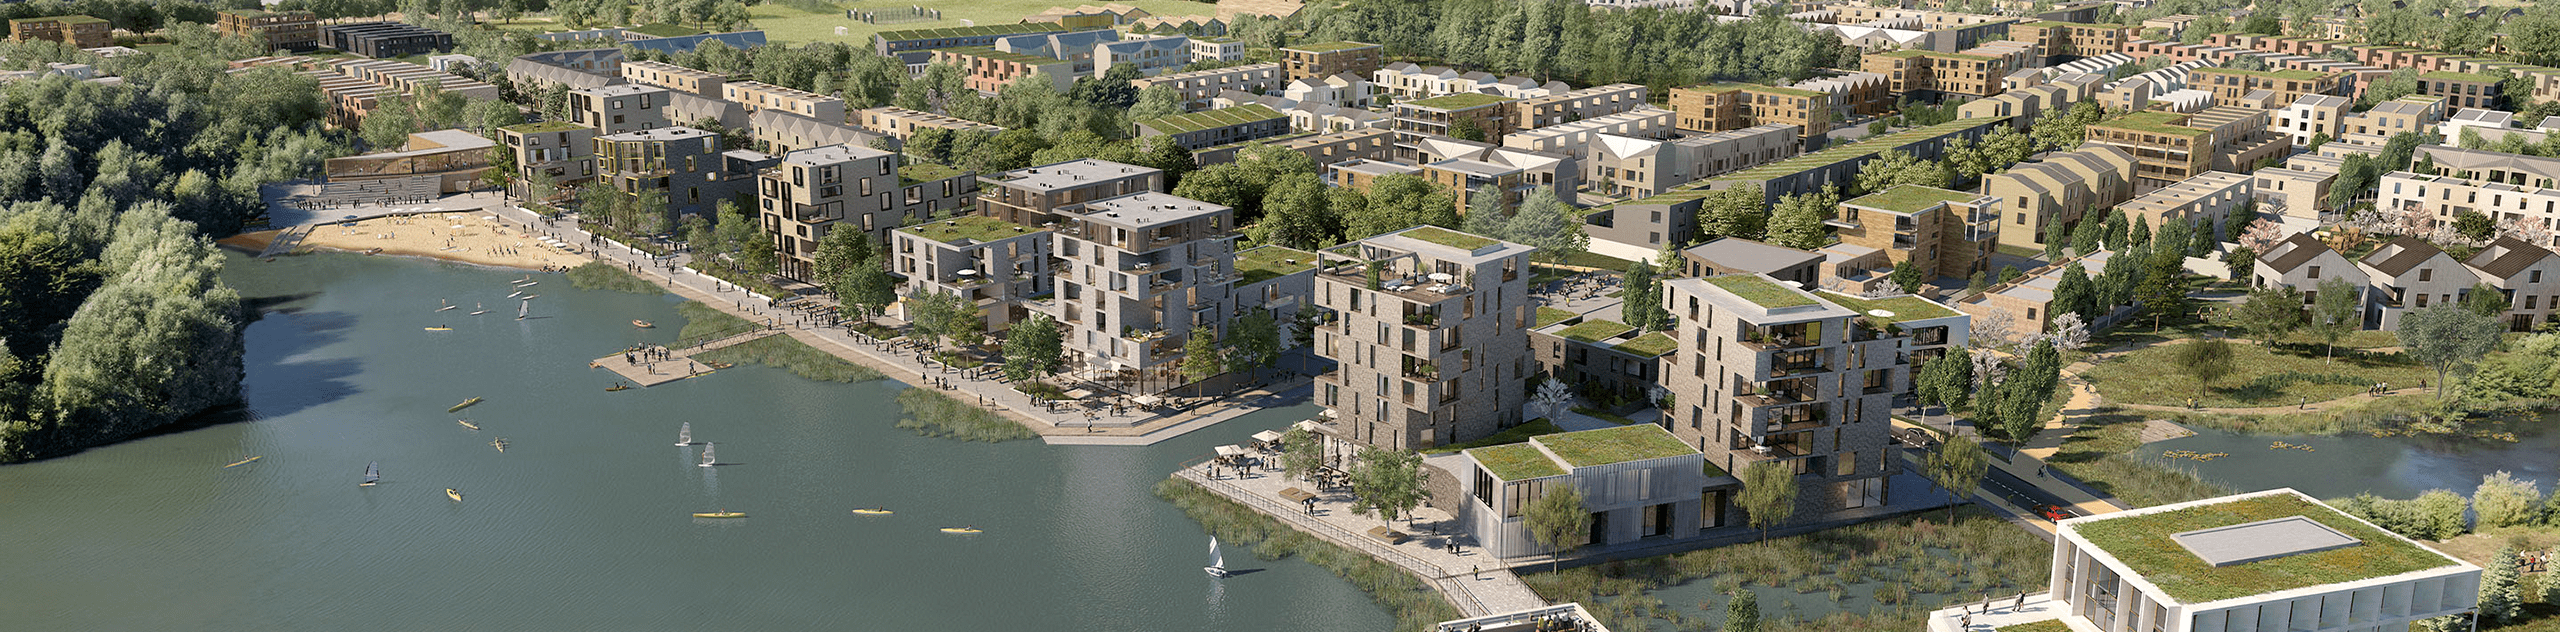 A CGI visual of the proposed Waterbeach lakeside development from above. © Assembly CGI